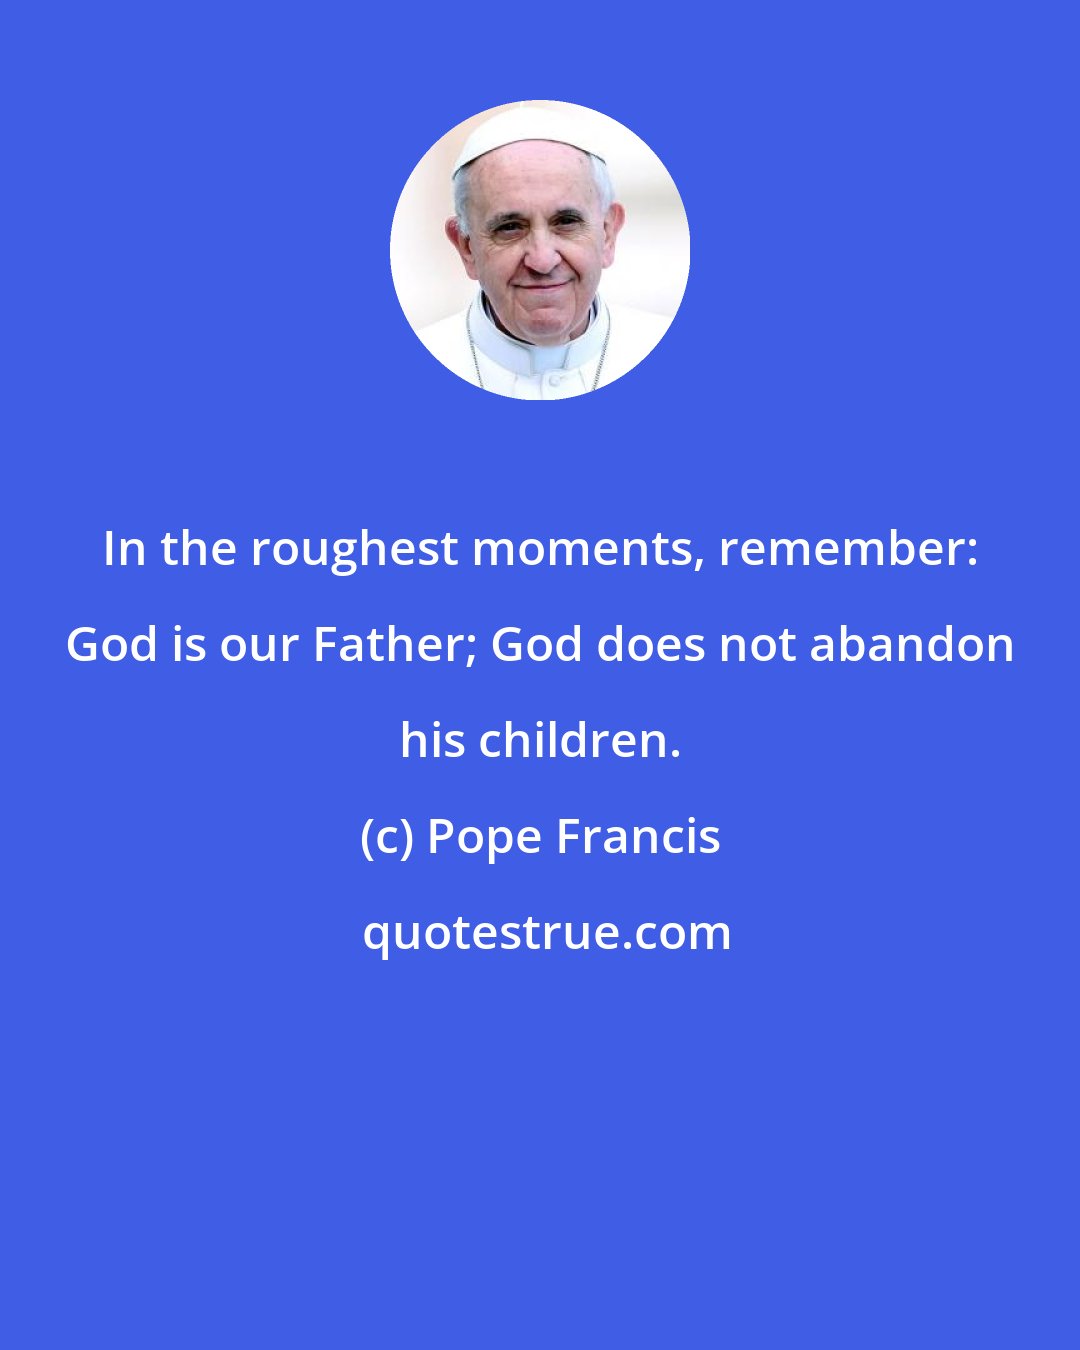 Pope Francis: In the roughest moments, remember: God is our Father; God does not abandon his children.